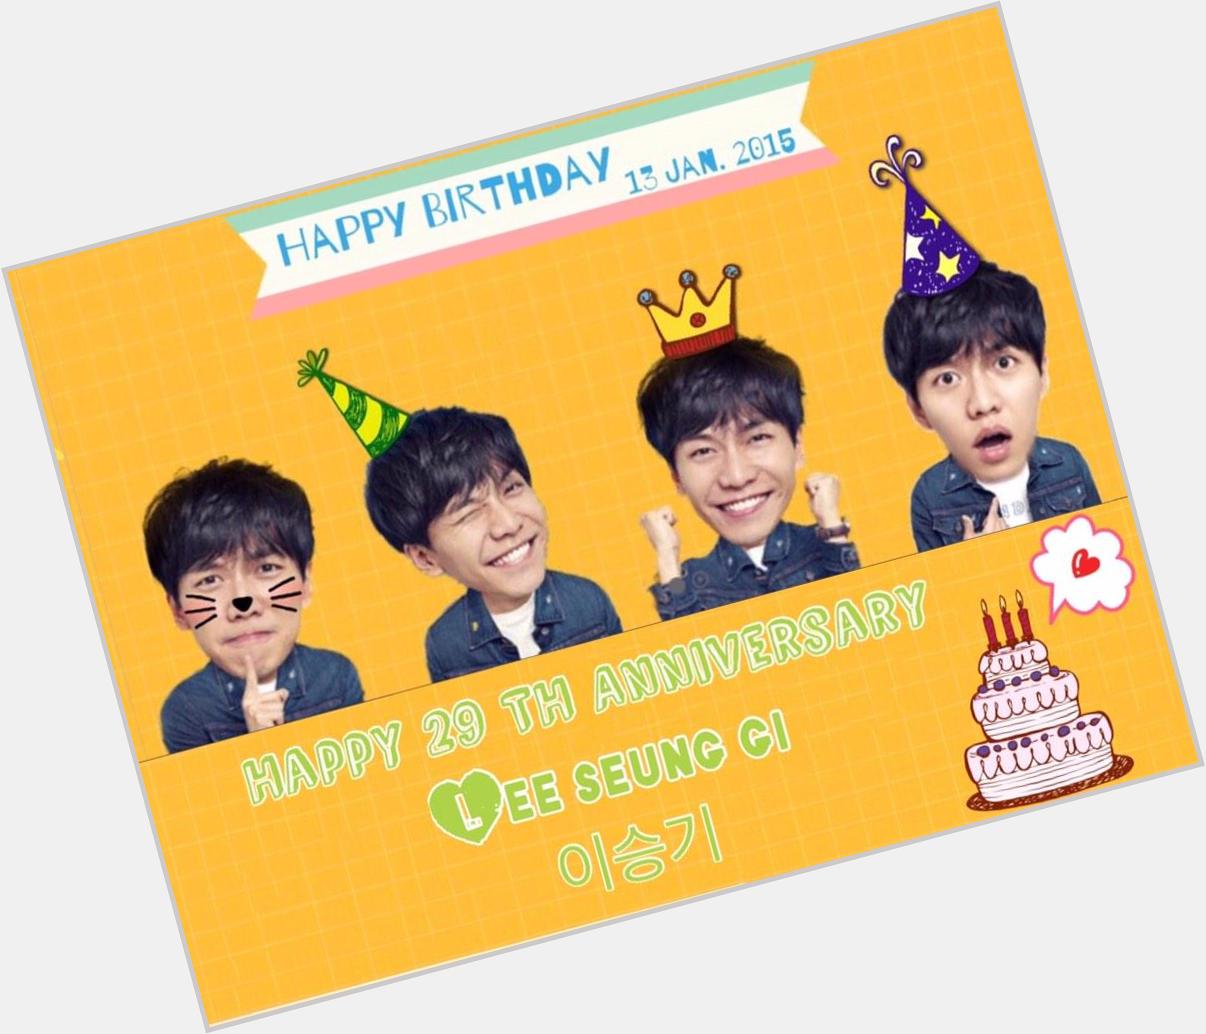  \" Happy Birthday to \"Lee Seung Gi\" \"May your birthday bring you as much happiness as you give\" 